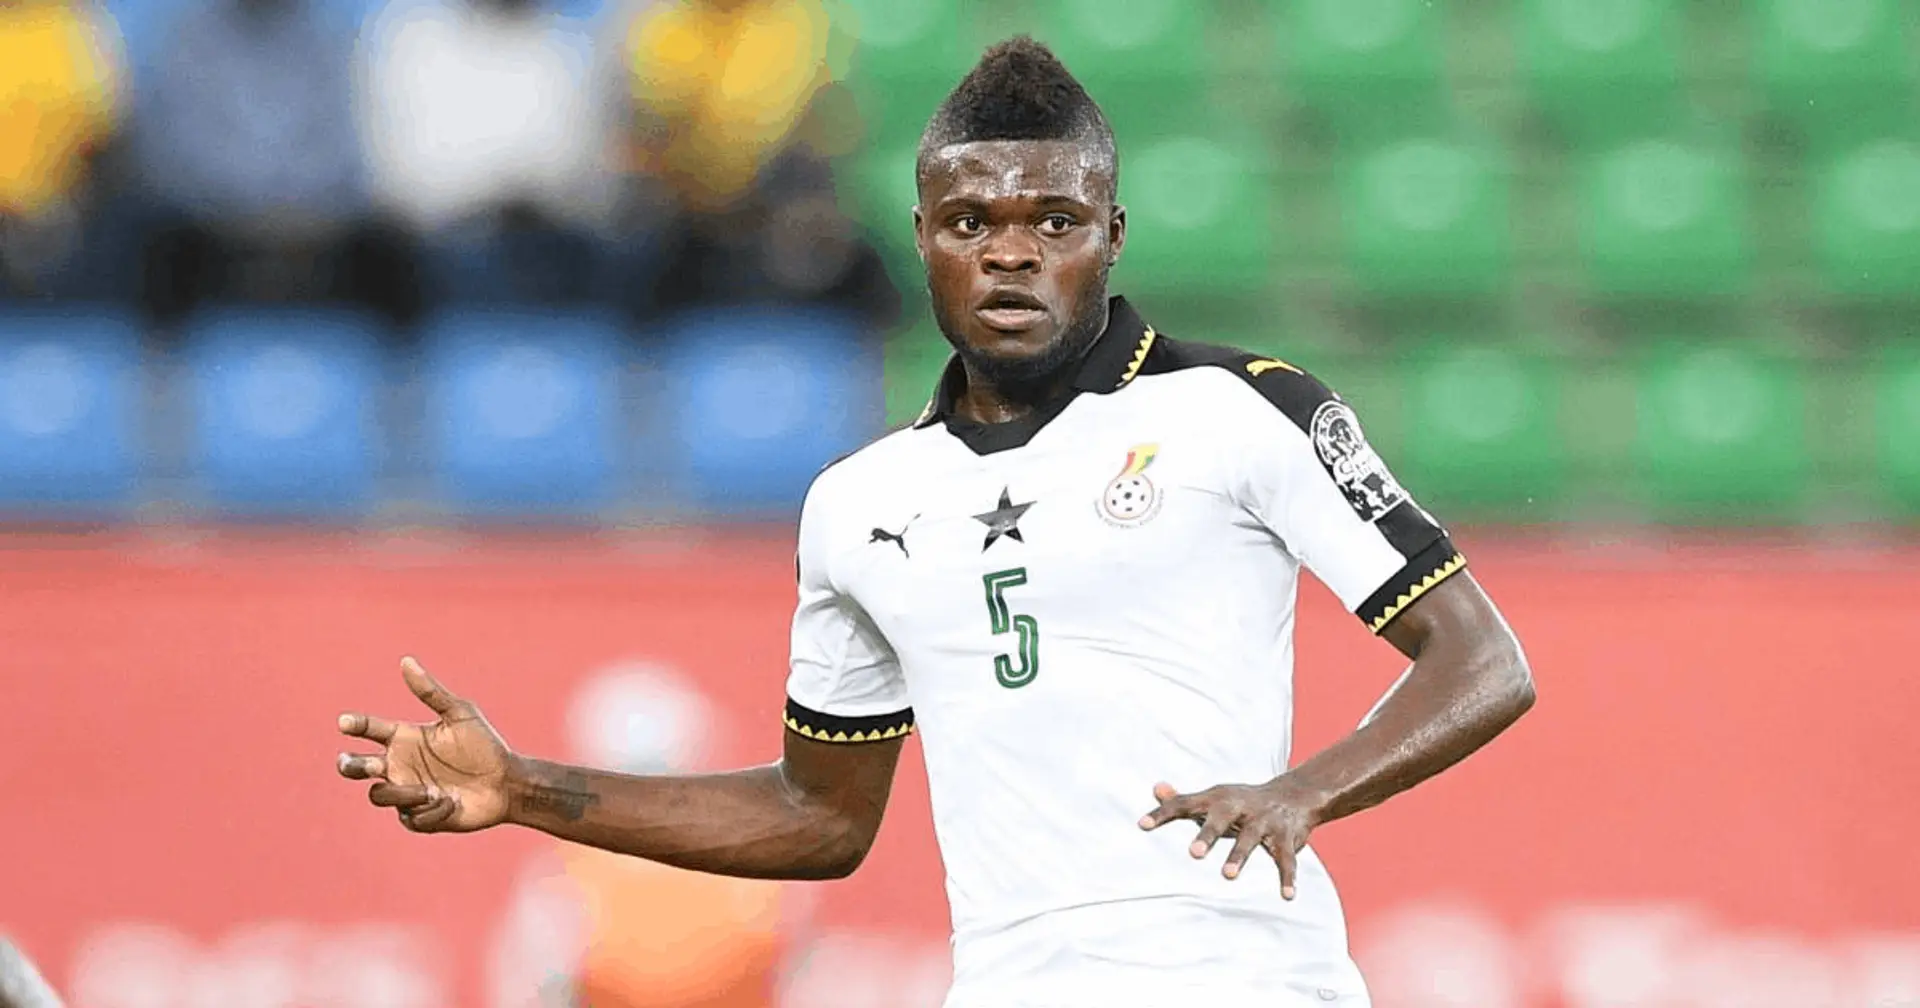 Thomas Partey called up to Ghana, set to be available only for 1 game